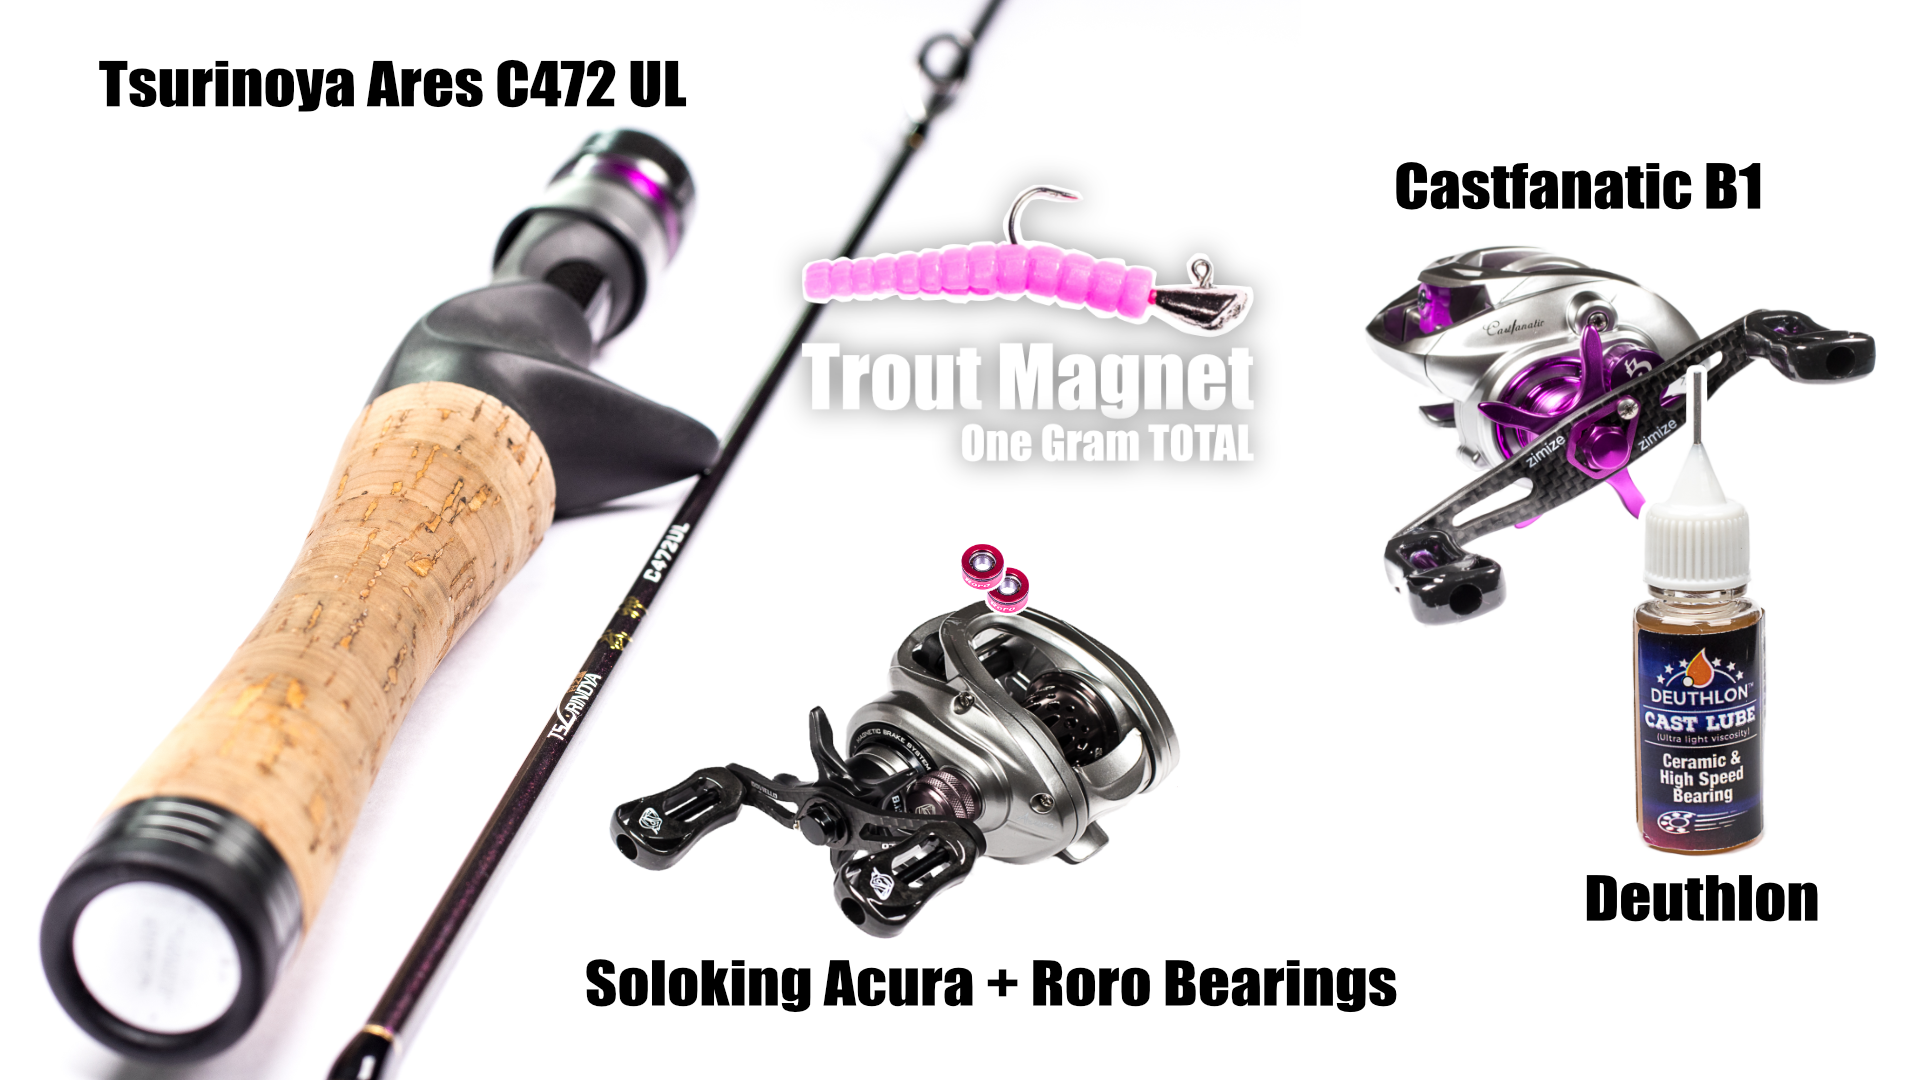 Trout Magnet Casting performance testing gear for BFS reels